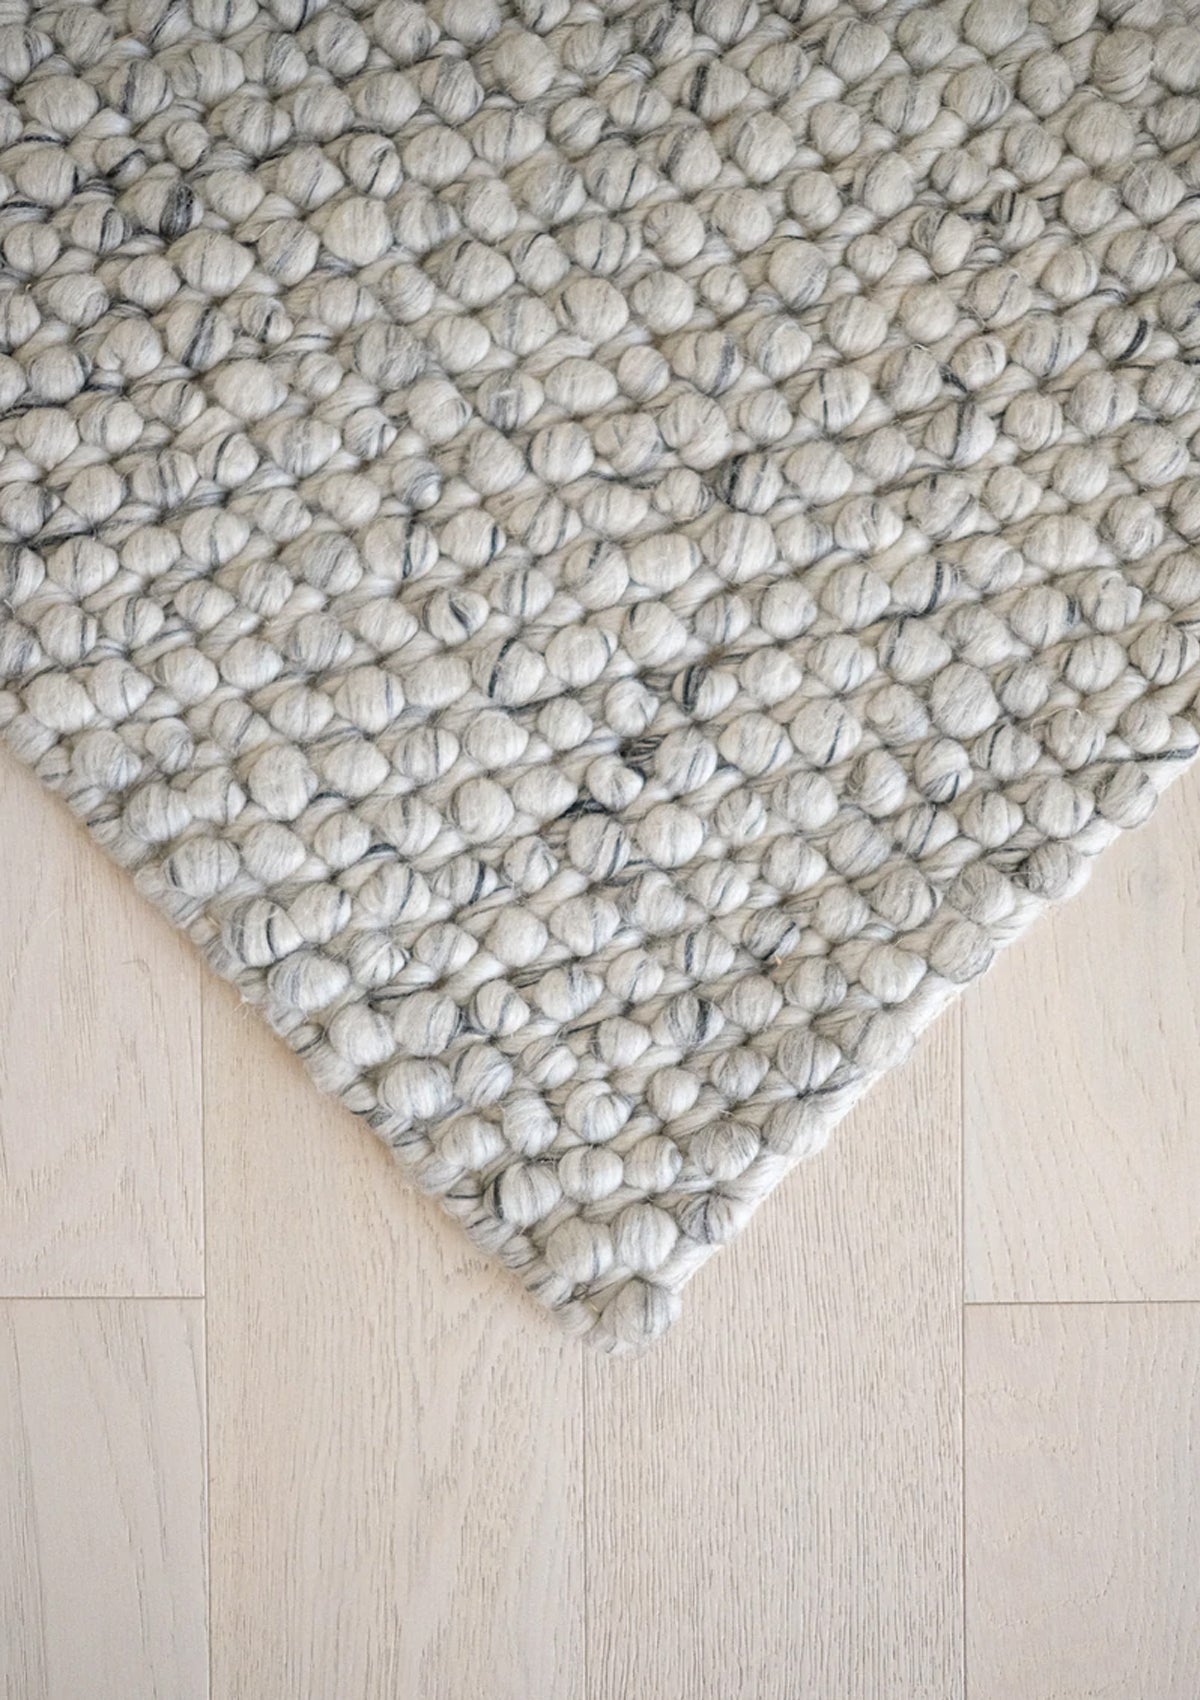 The Lark Rug is hand woven and is made of 60% Wool, and 40% Polyester.